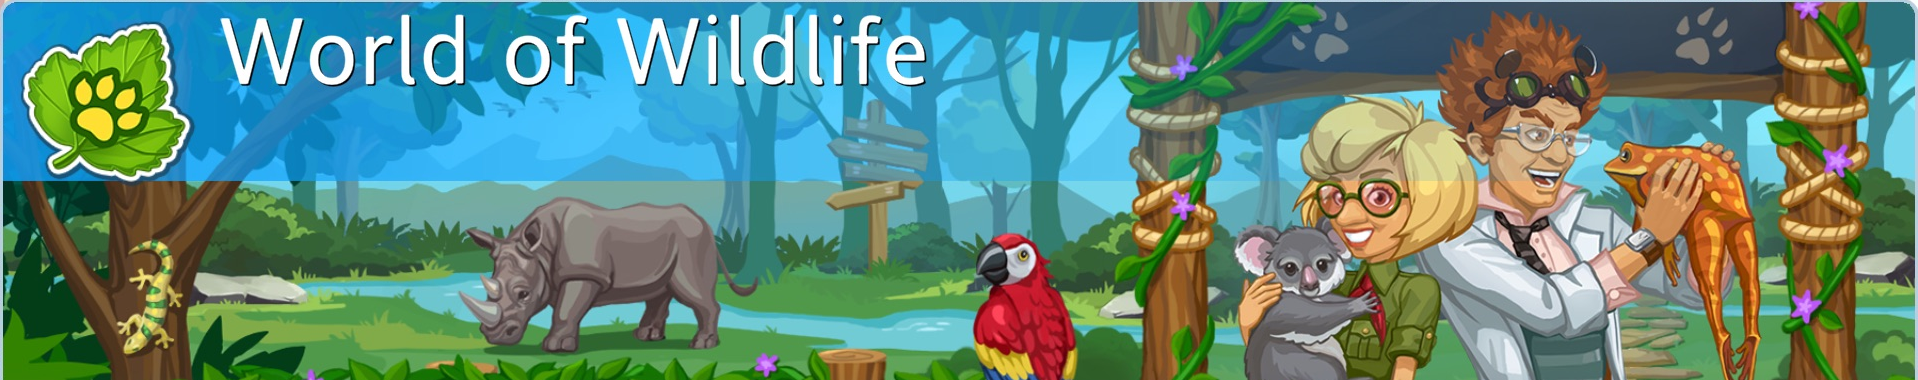 world_of_wildlife_banner.png